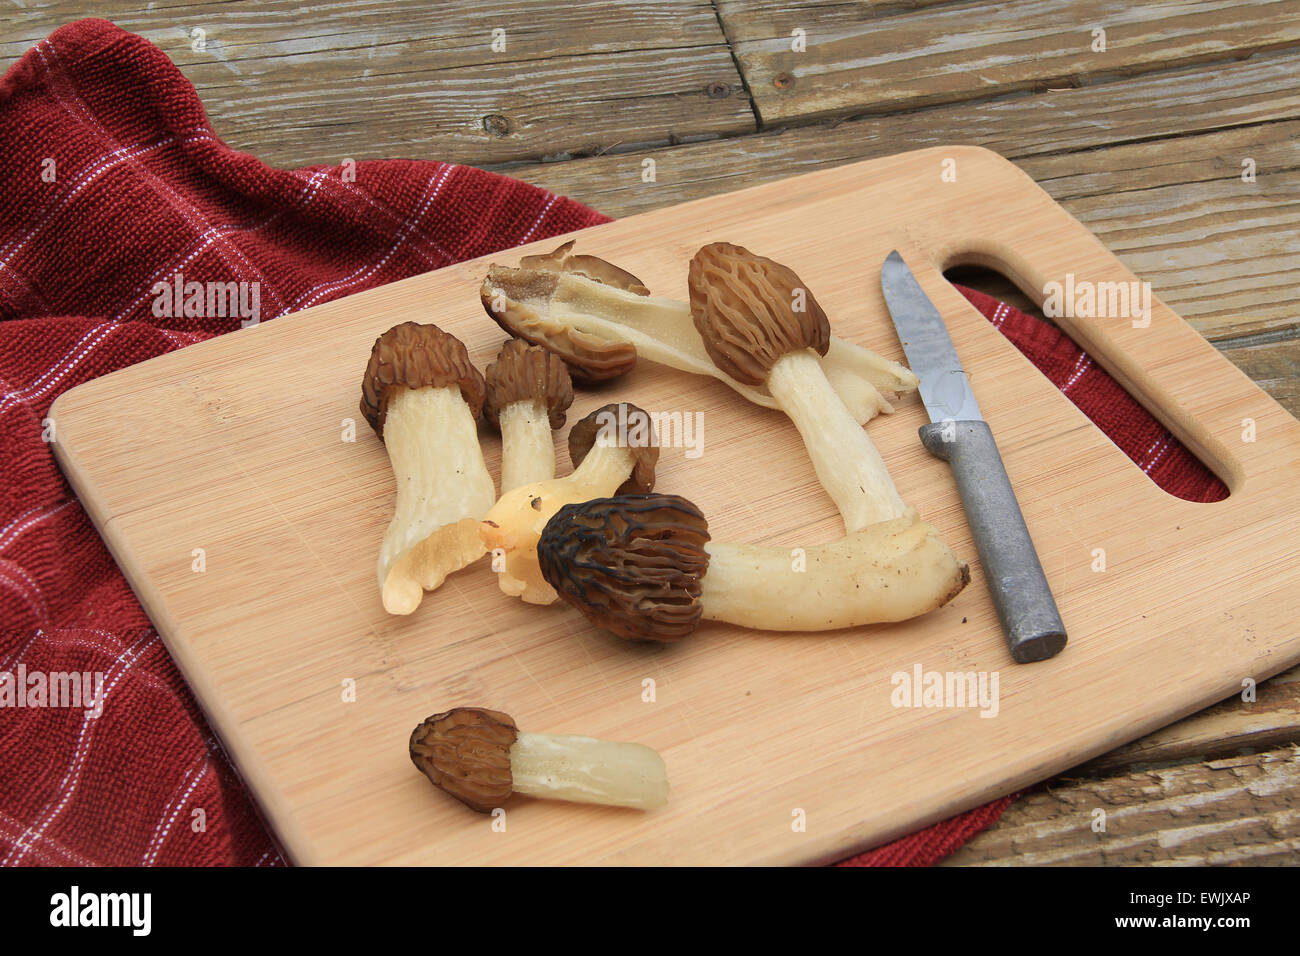 Wild Moral Mushrooms on a Cutting Board Stock Photo